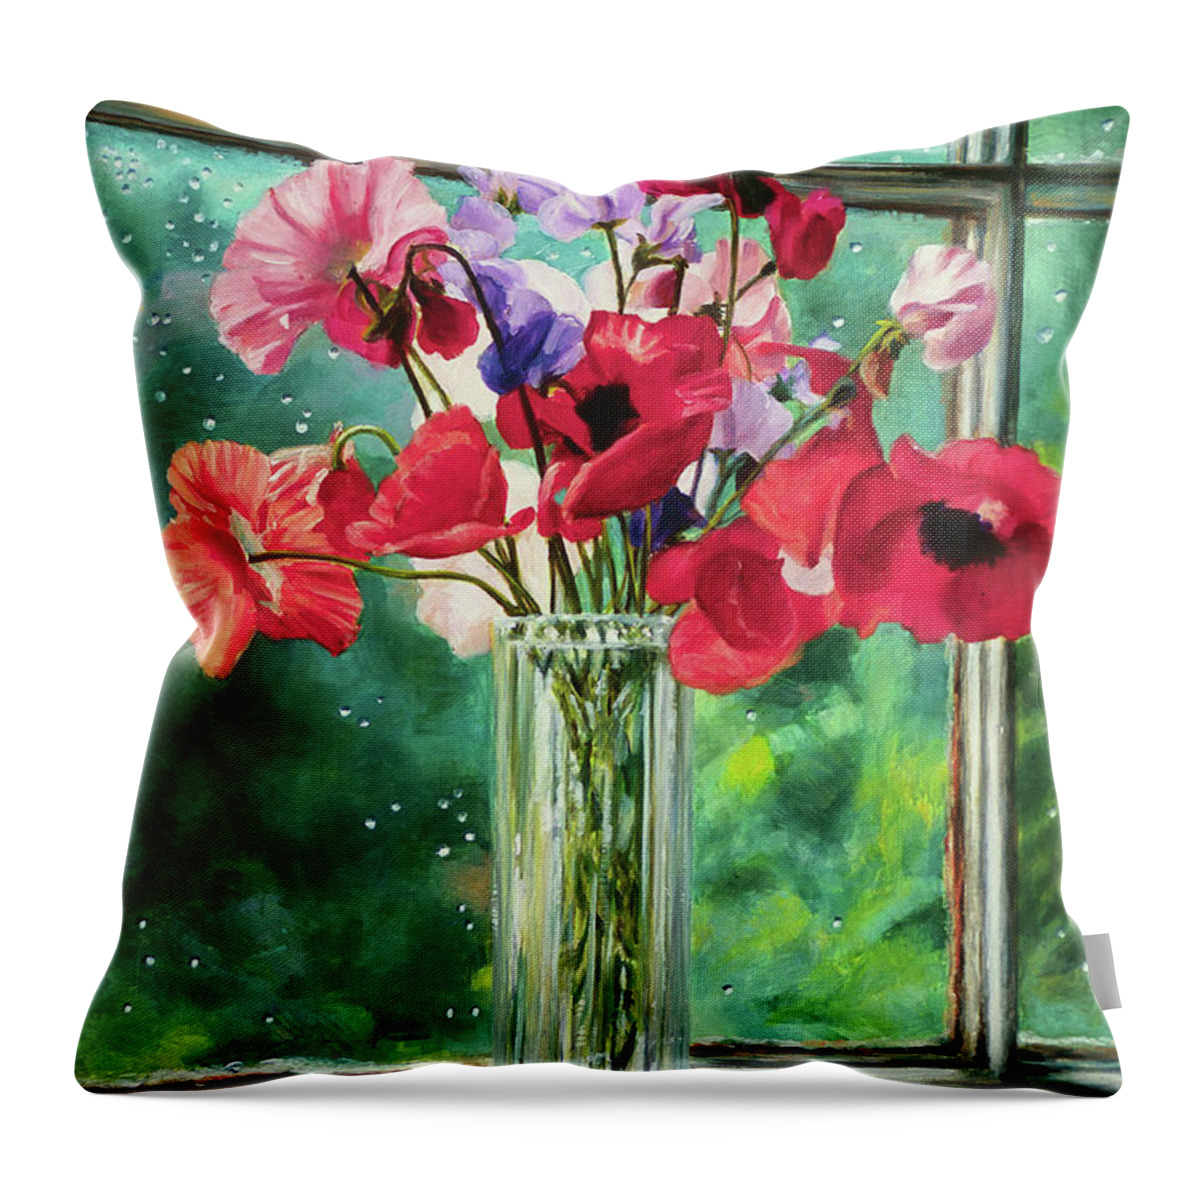 Poppies Throw Pillow featuring the painting Poppies on Windowsill by Marie Witte